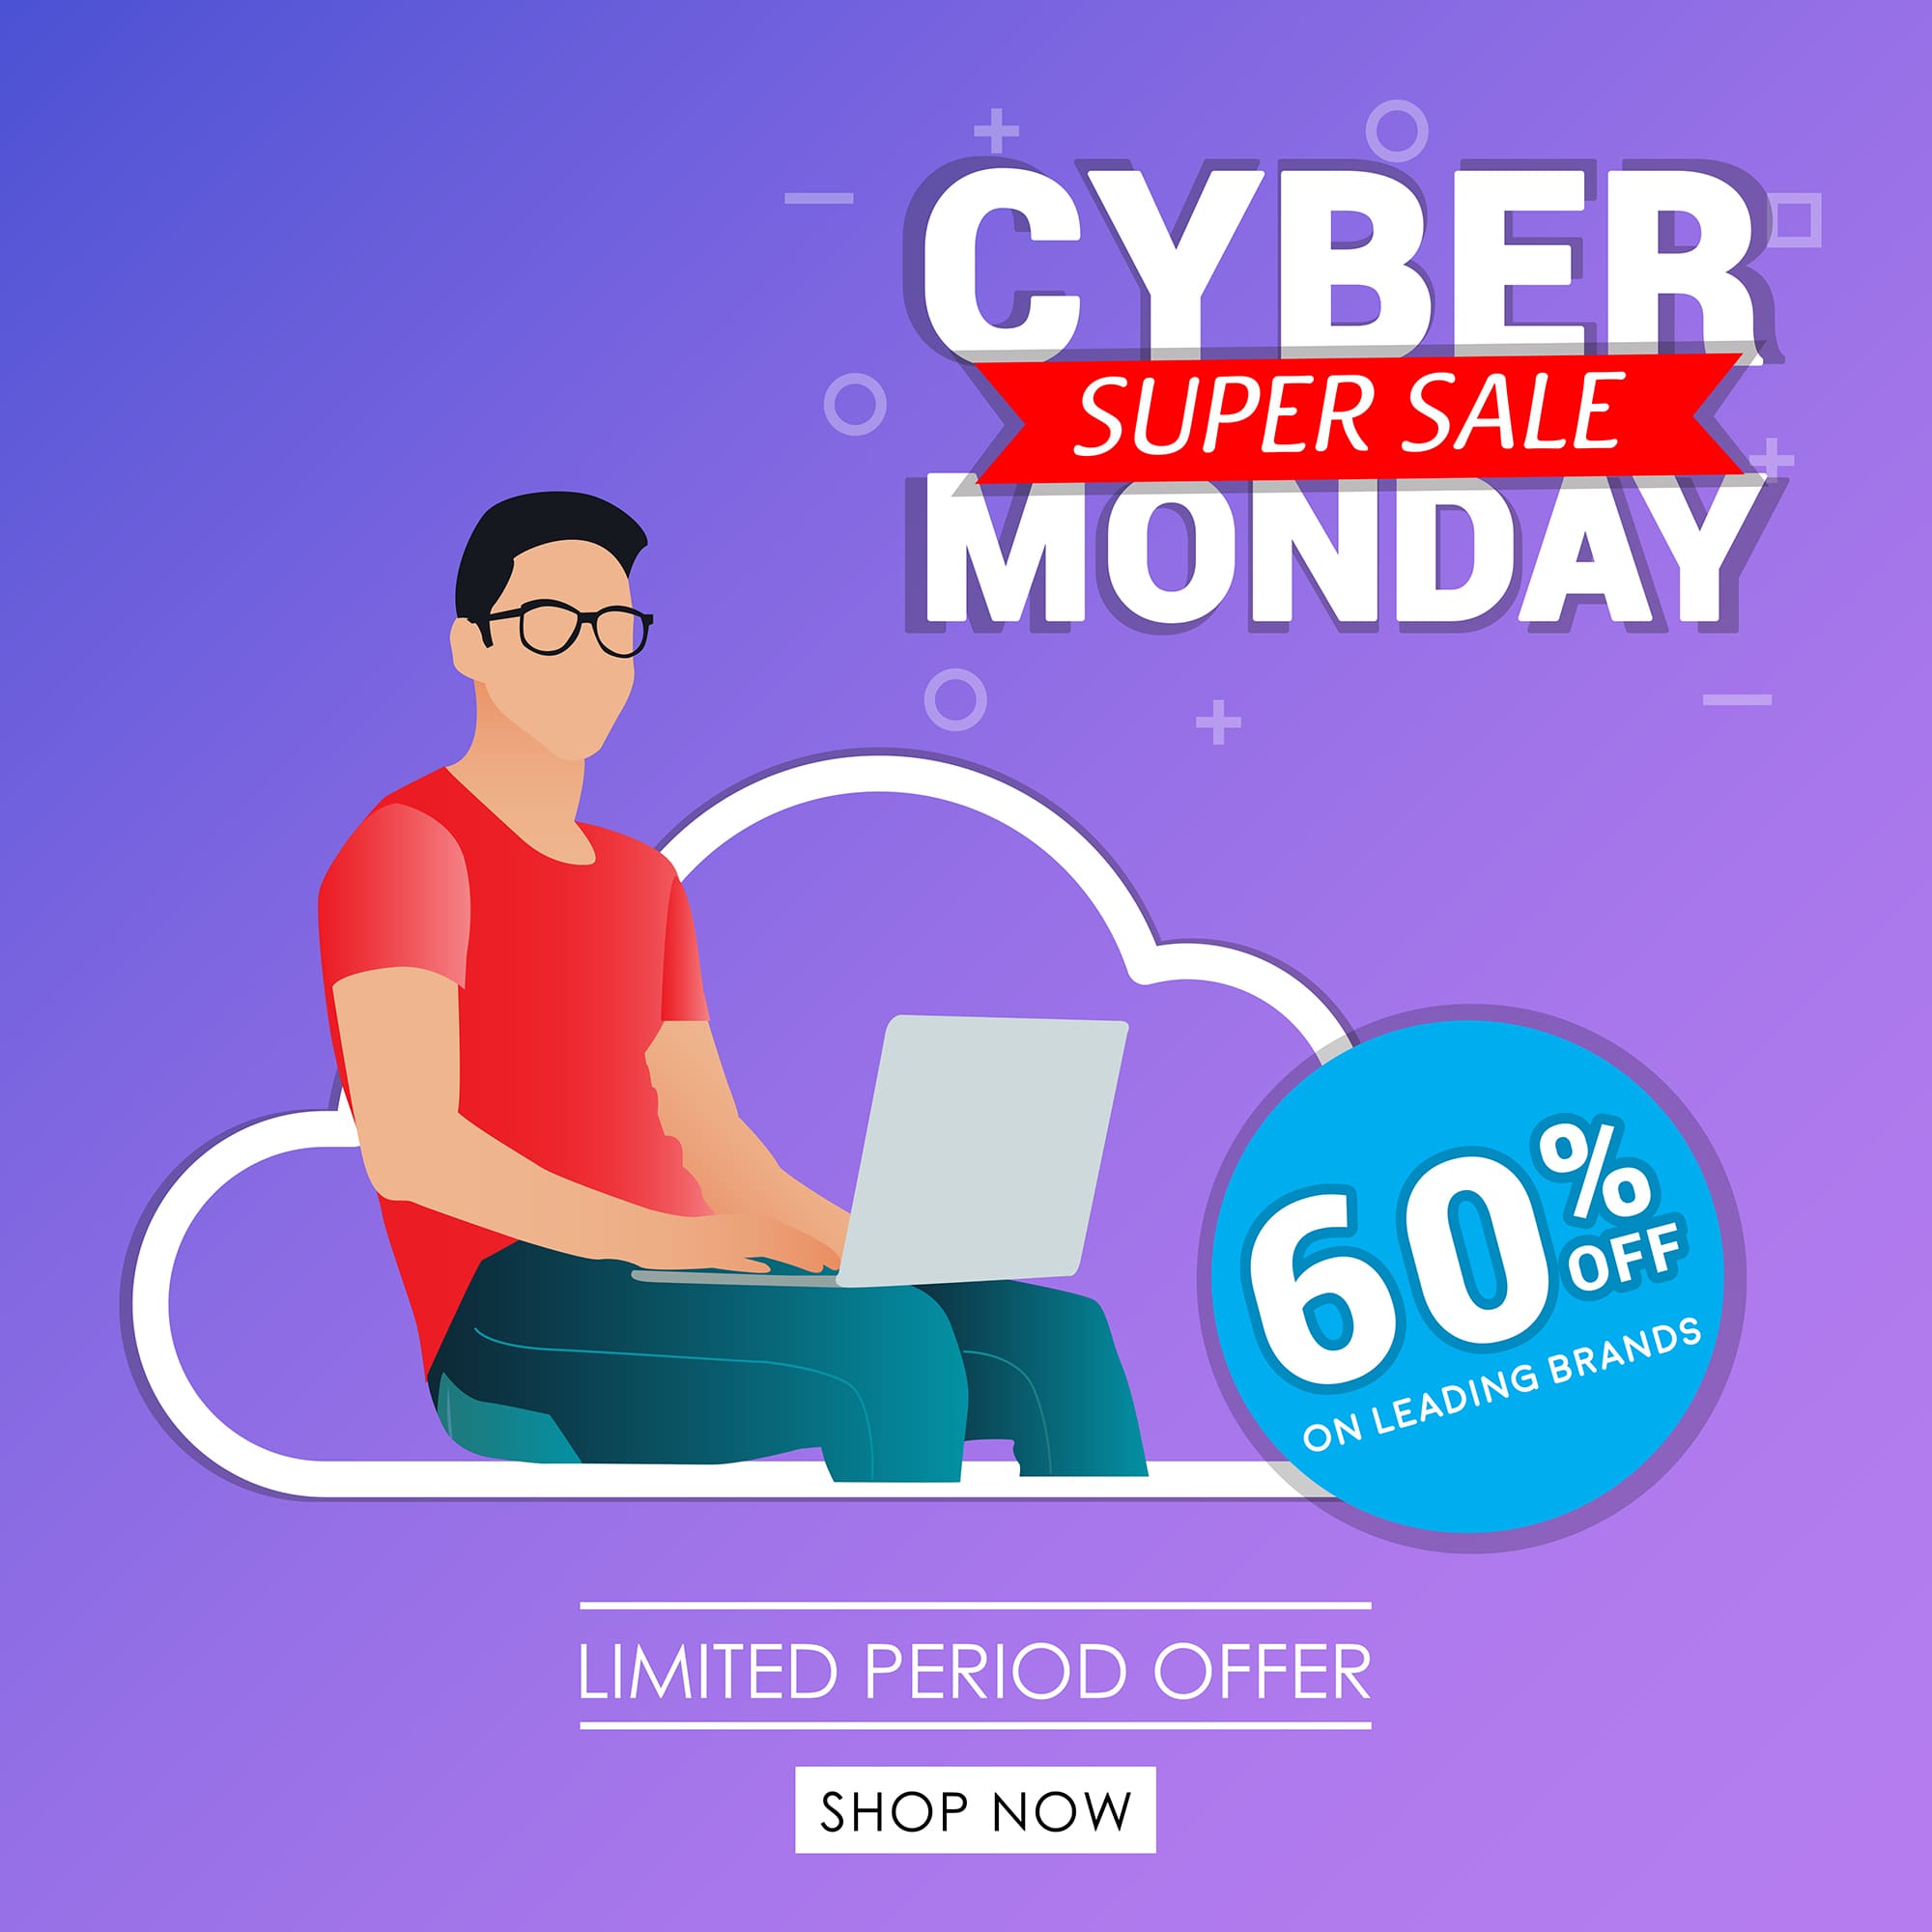 Cyber Monday shopping template with a person holding laptop vector illustration for free download